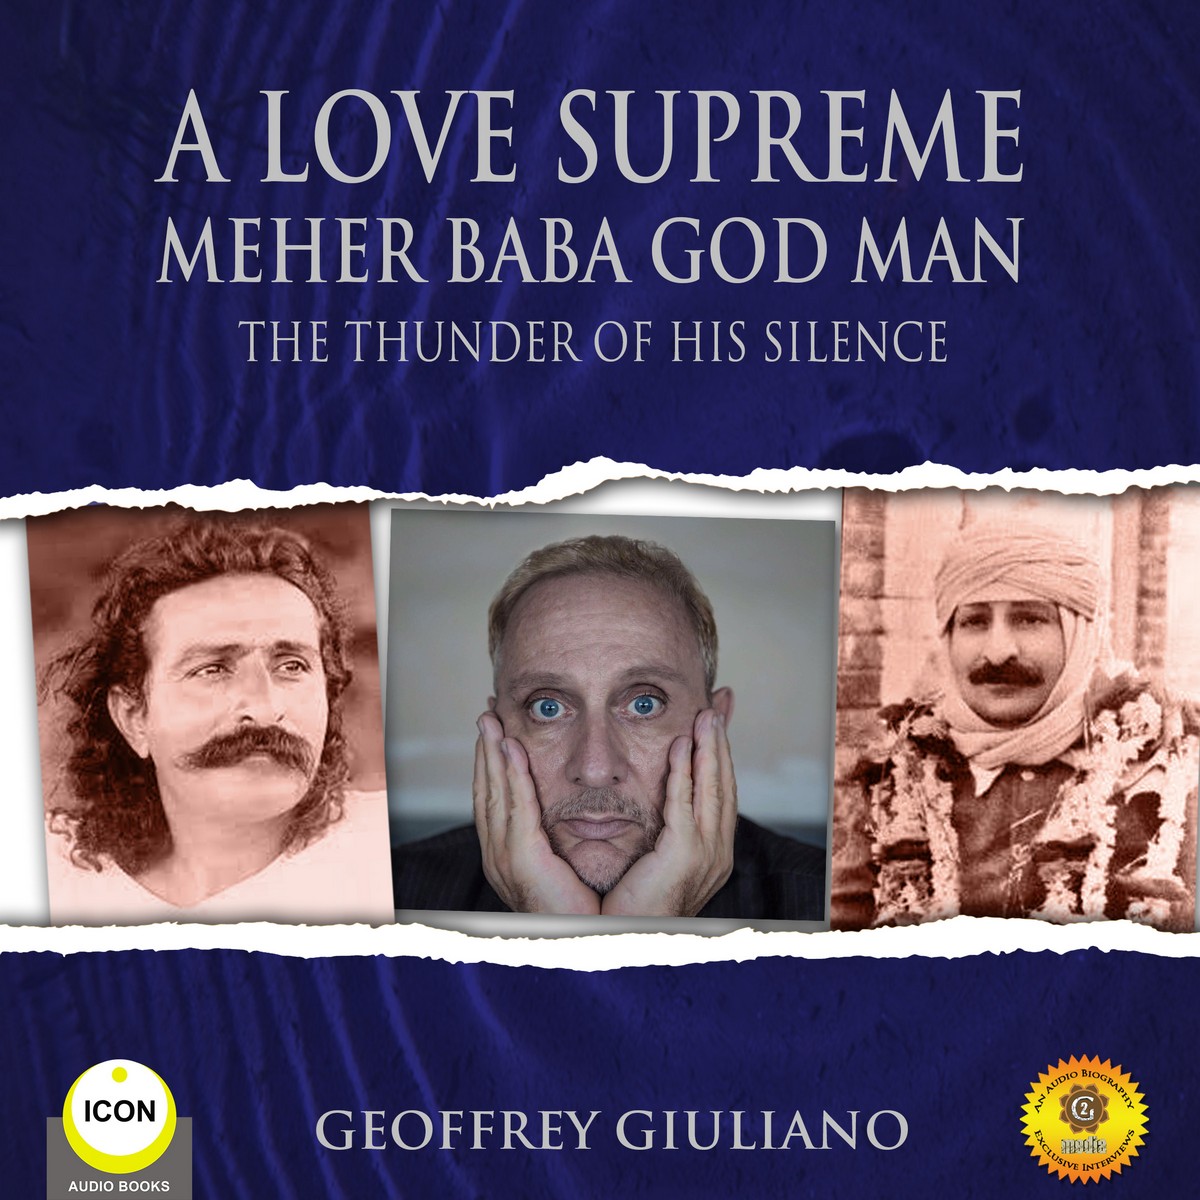 A Love Supreme Meher Baba God Man – The Thunder of His Silence